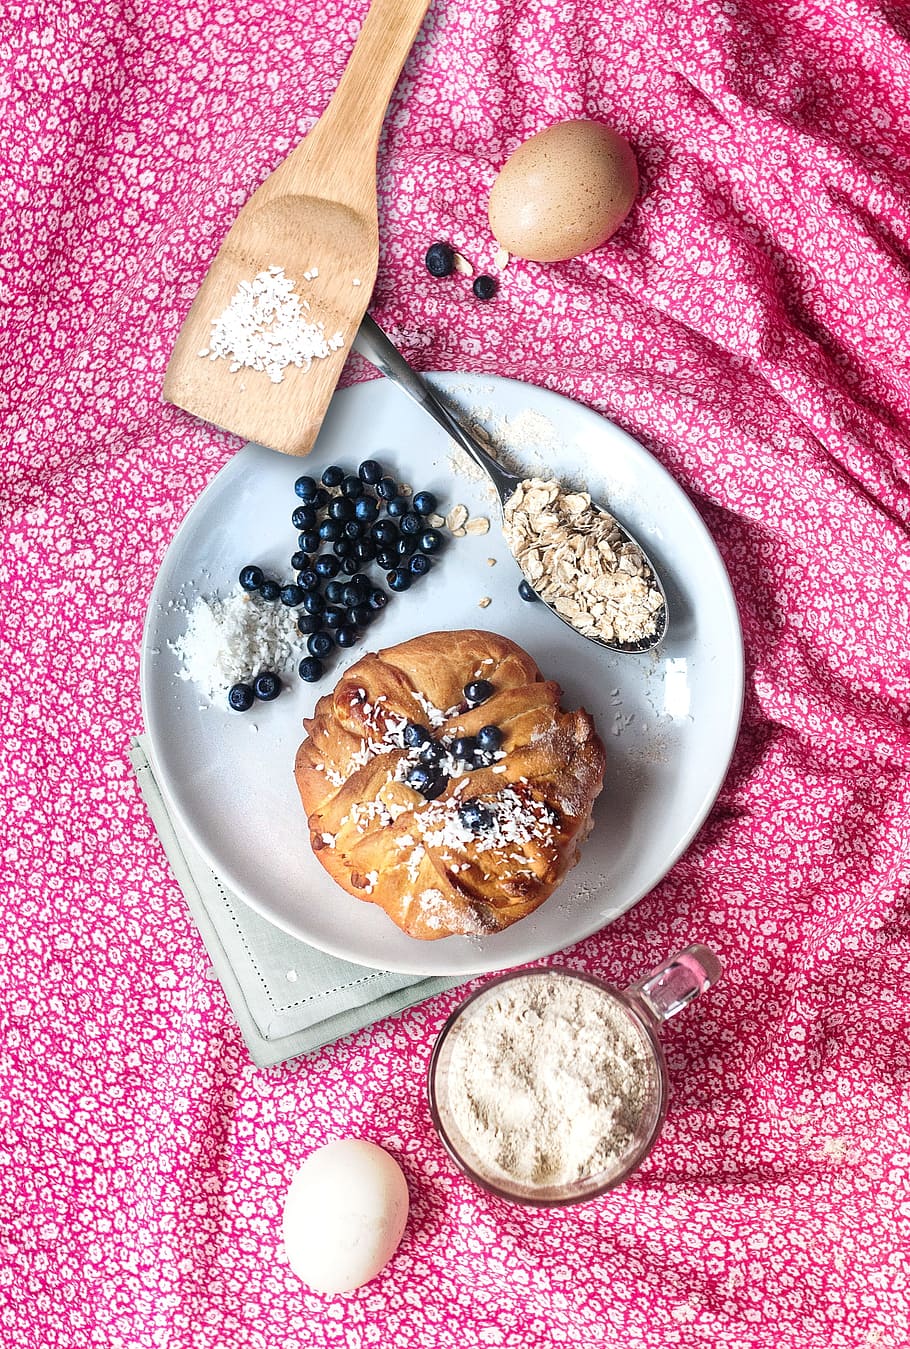 flatlay photography, foods, baking, berry, blueberry, pink, plate, oatmeal, flour, recipe